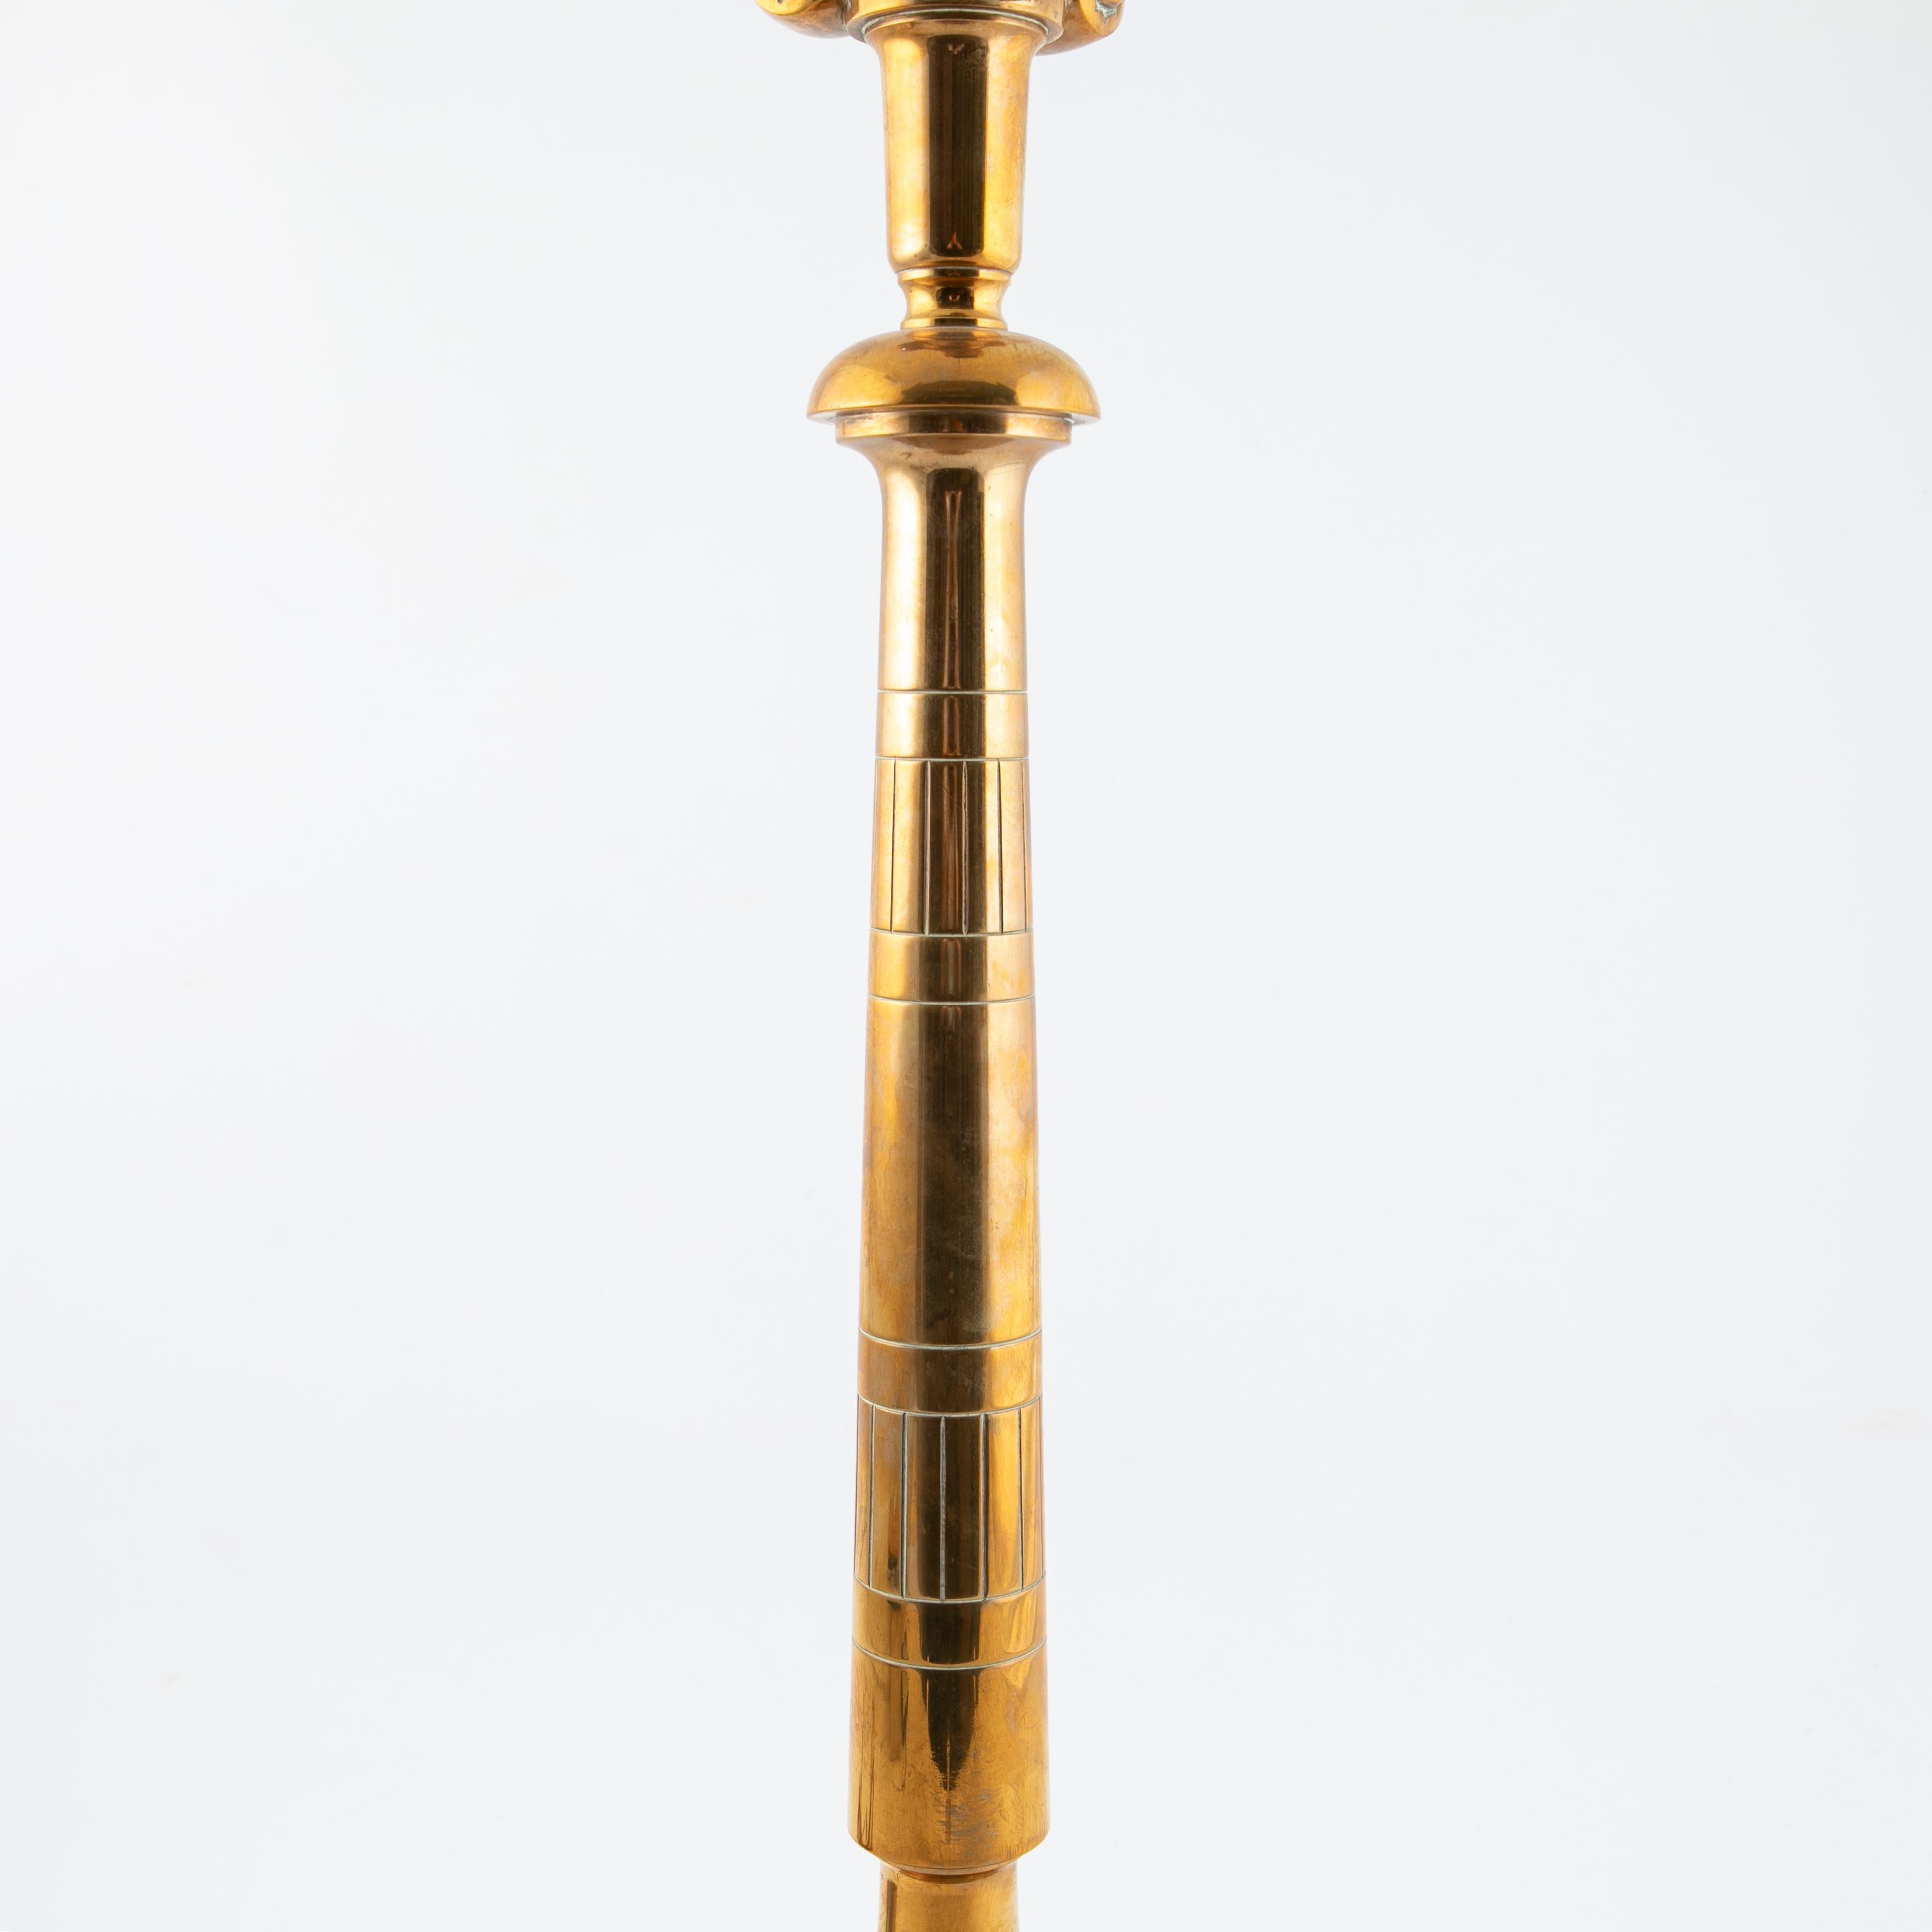 Rare Large Art Nouveau Brass Table Lamp, Presumably by Thorvald Bindesbøll For Sale 4